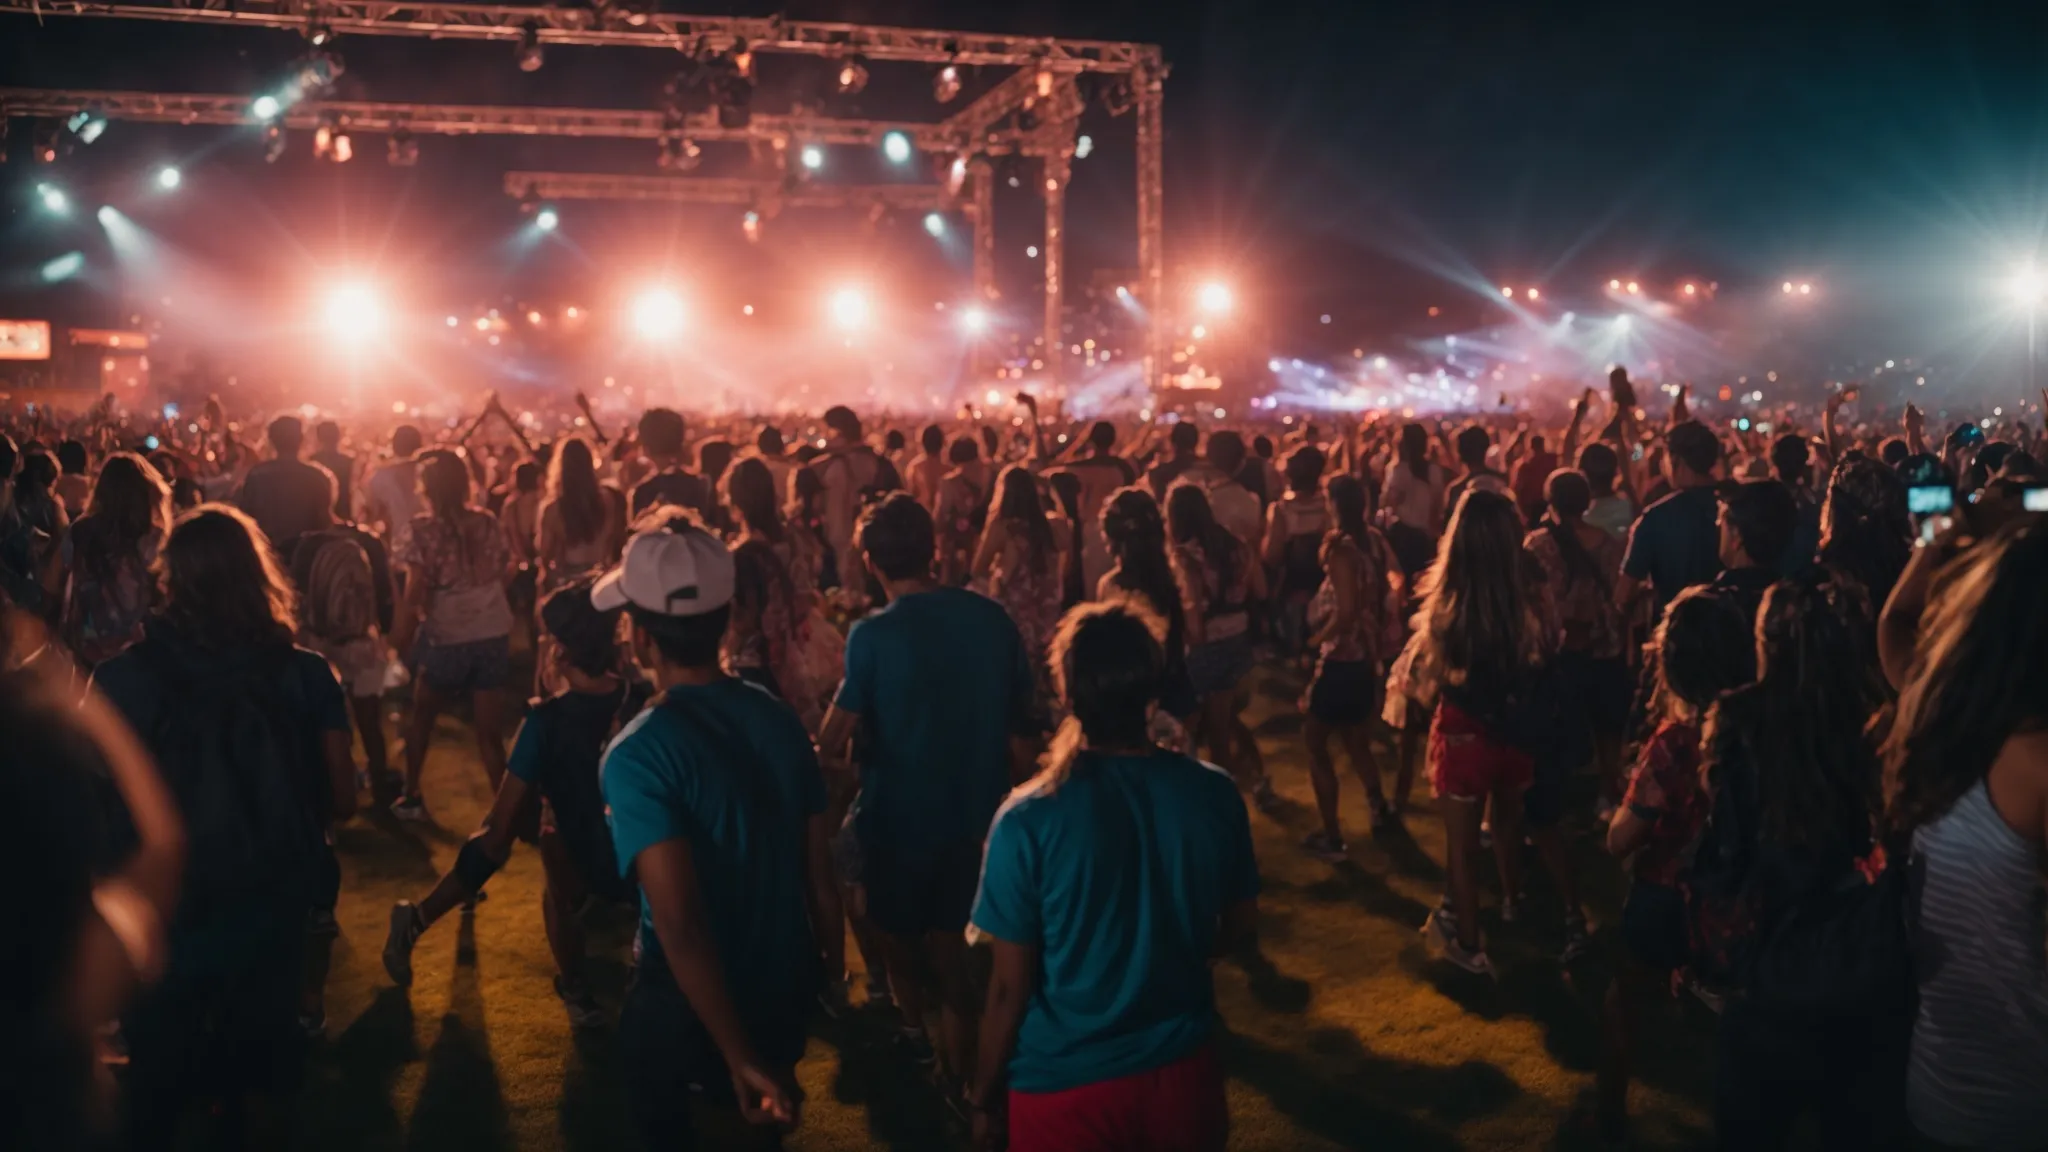 flash illuminates a cheerful crowd dancing under vibrant stage lights at a lively music festival.